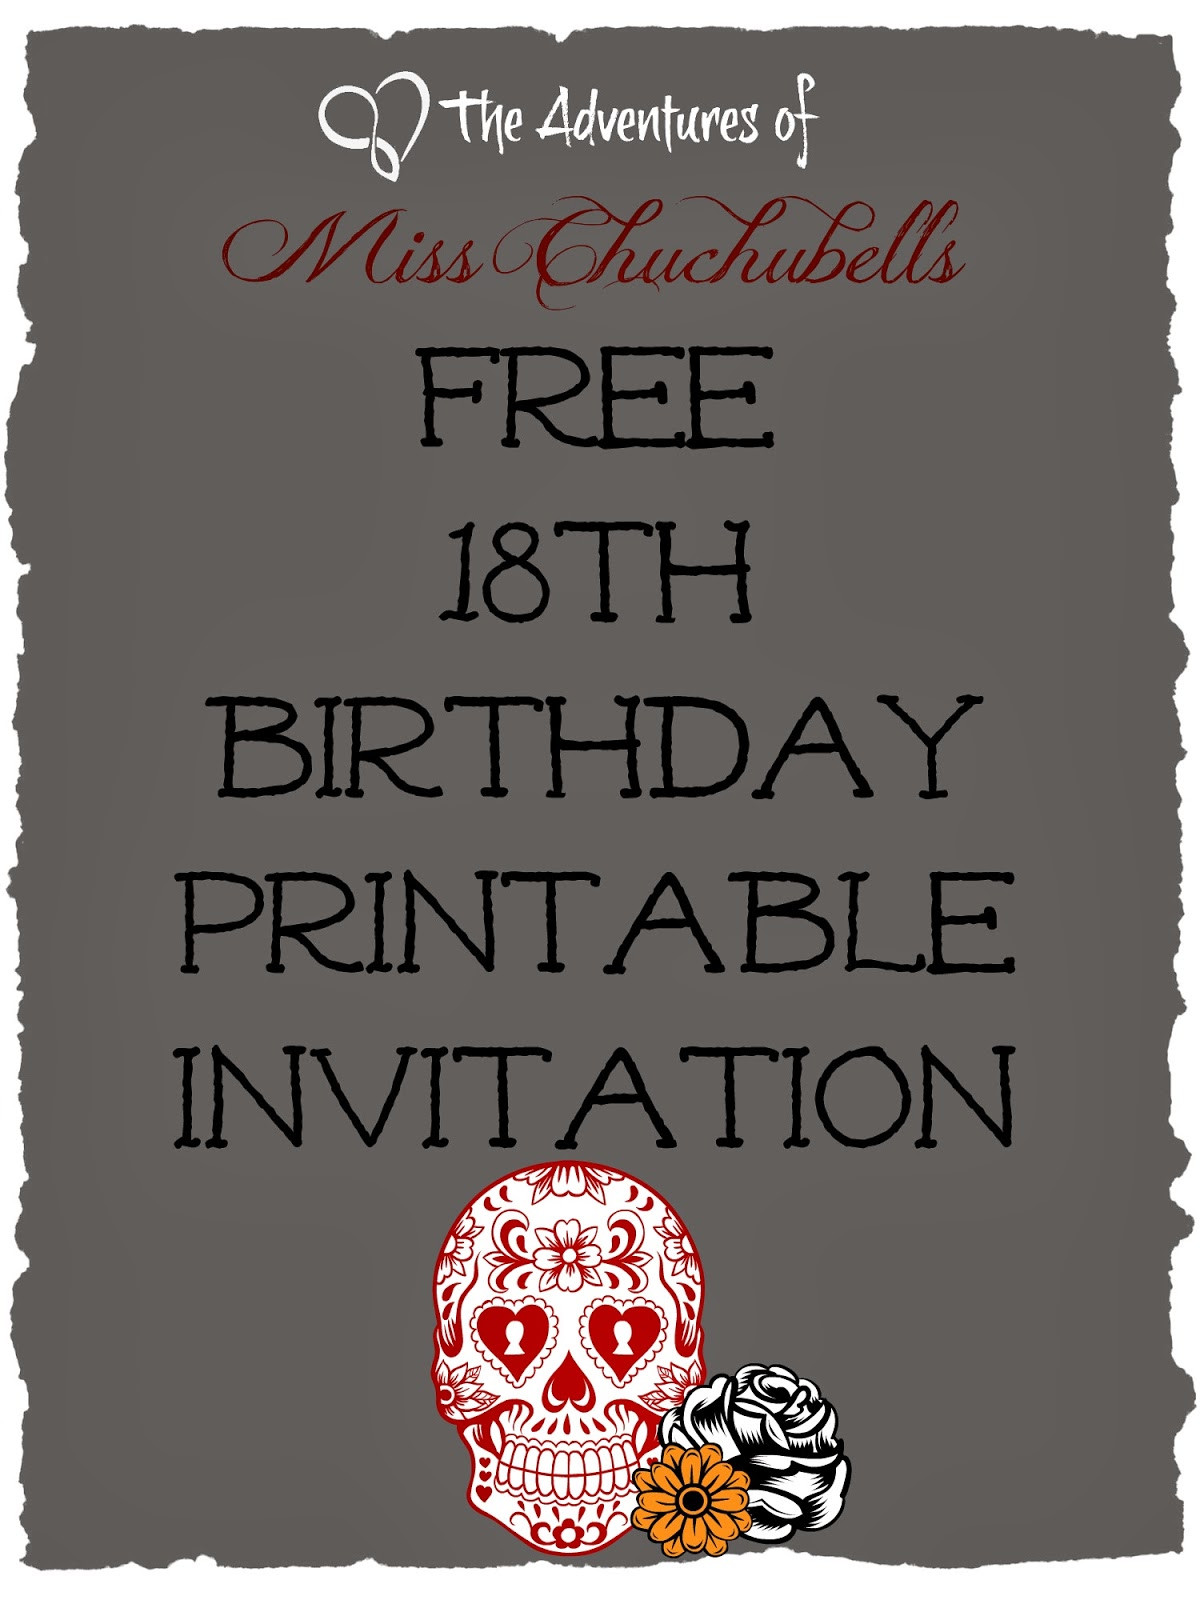 18th Birthday Invitations
 The Adventures of Miss Chuchubells DIY Project Free 18th